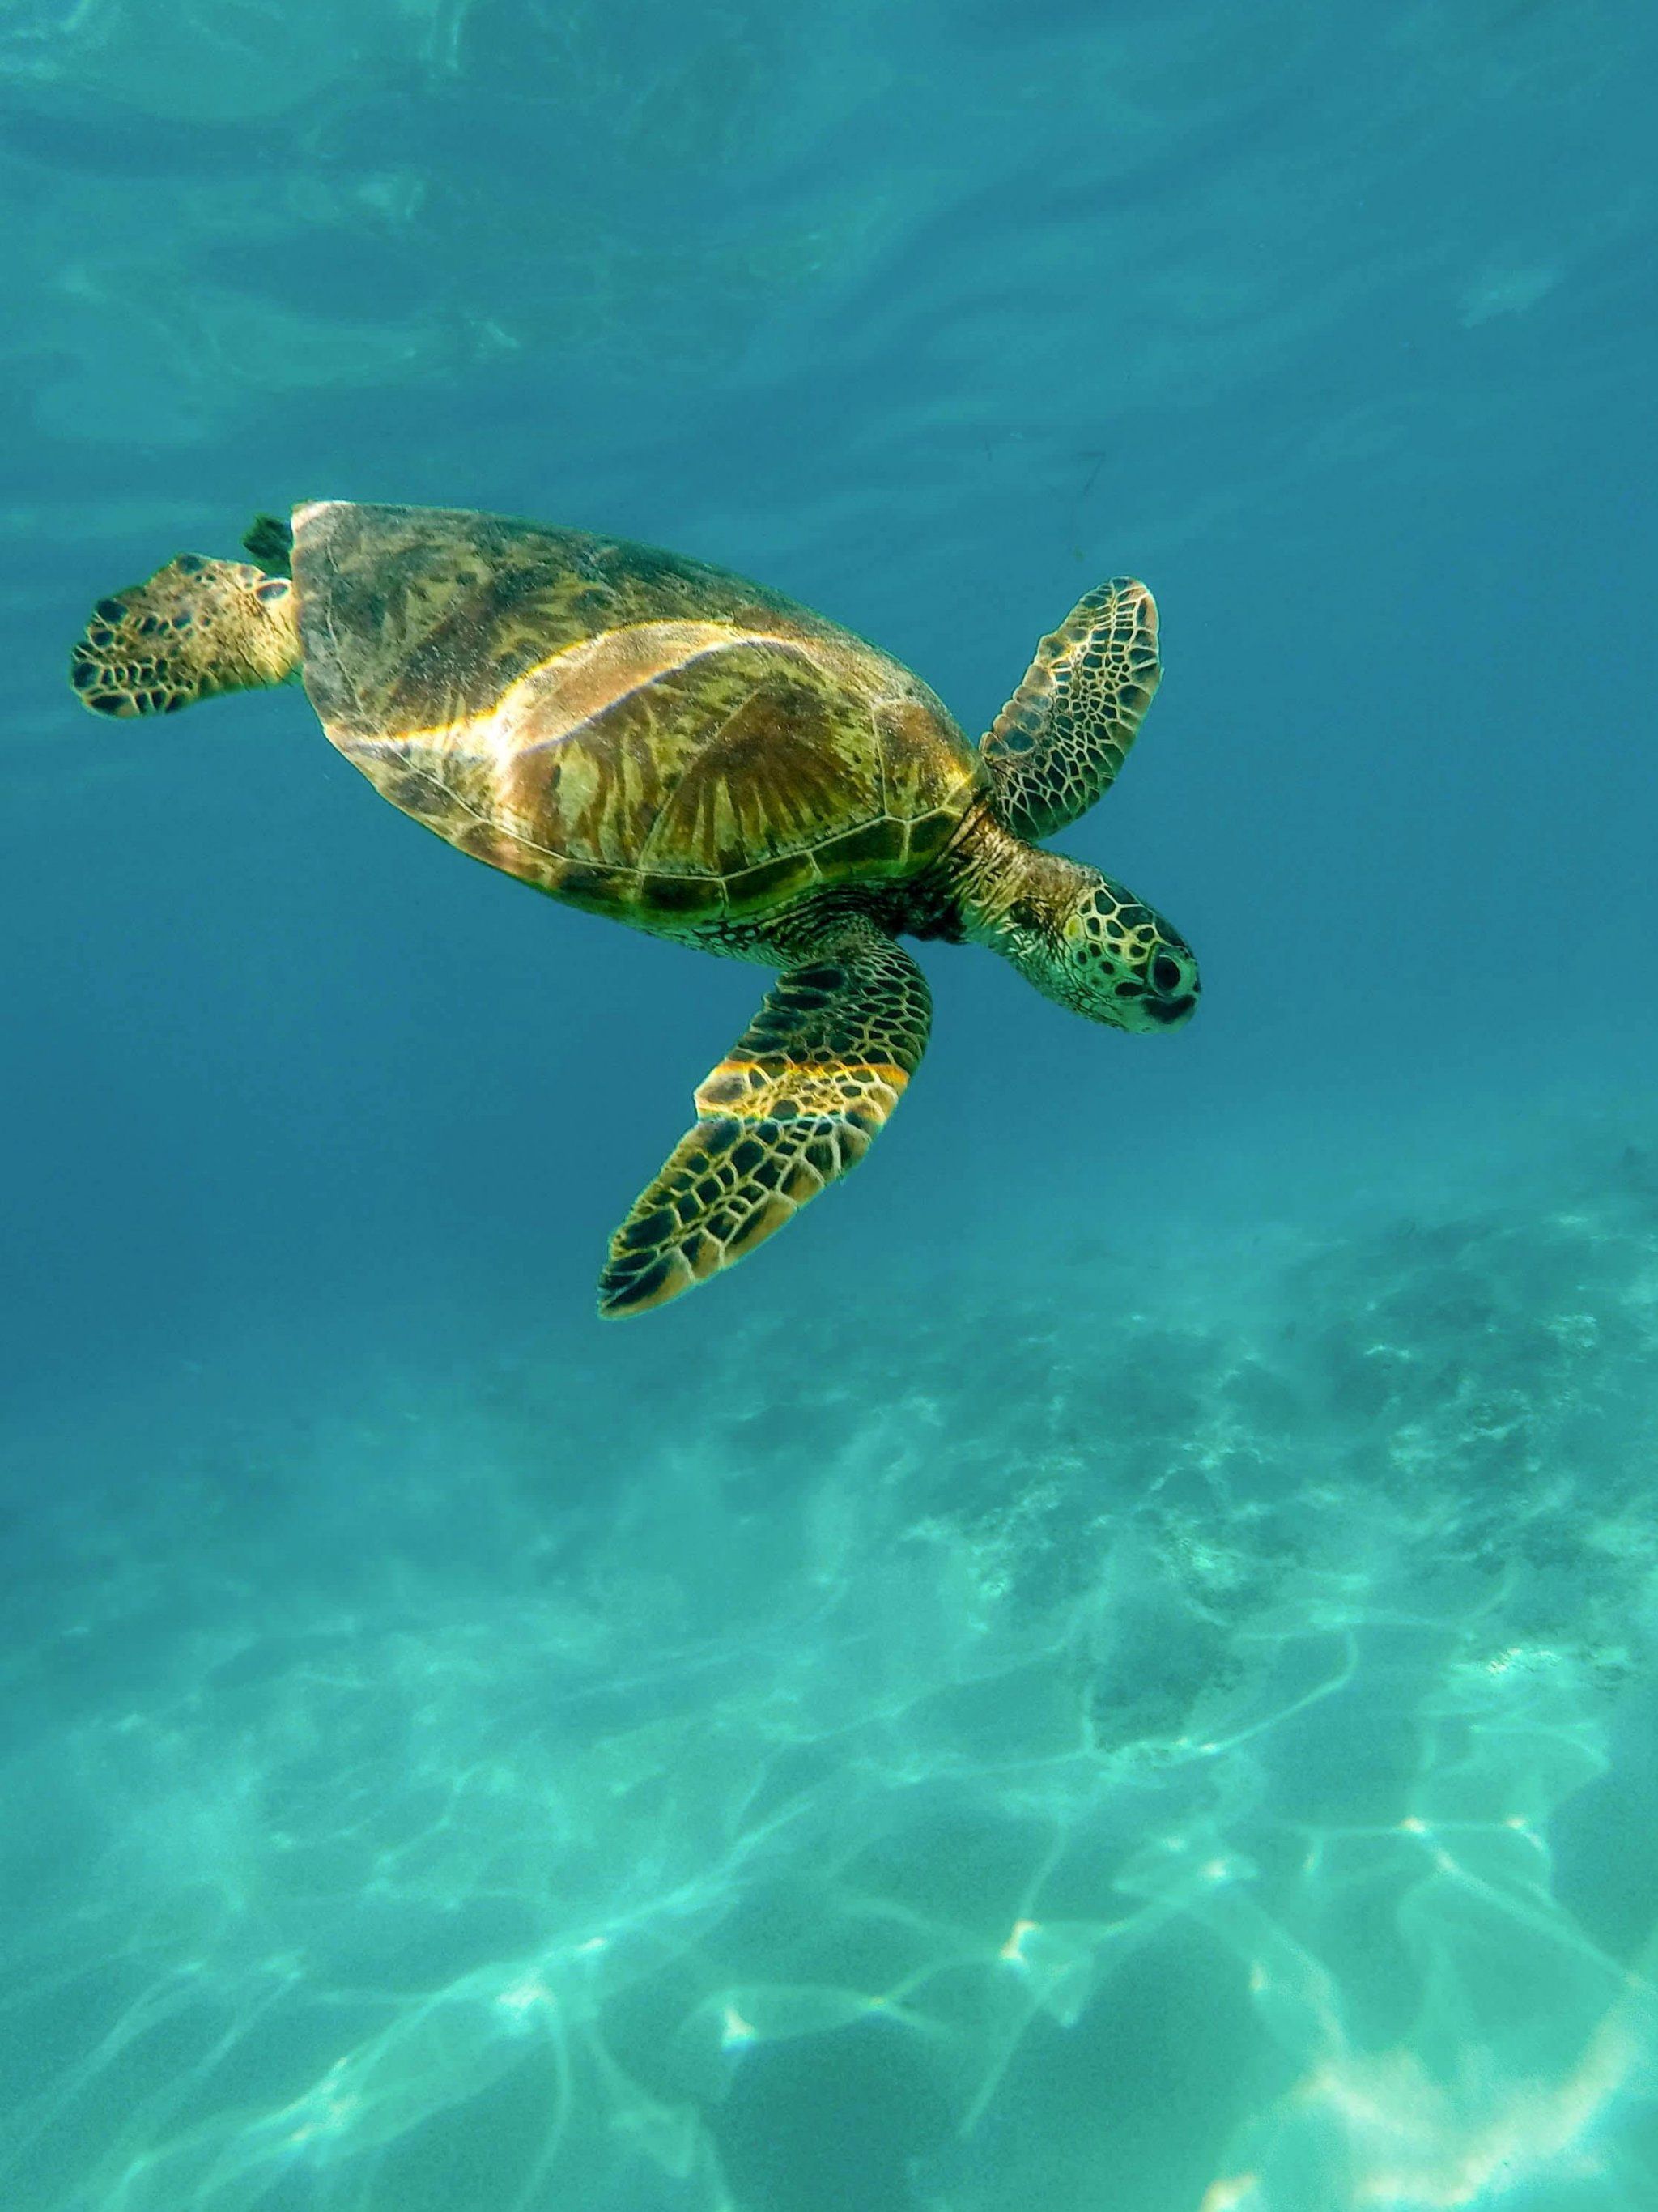 A turtle swimming in the ocean - Turtle